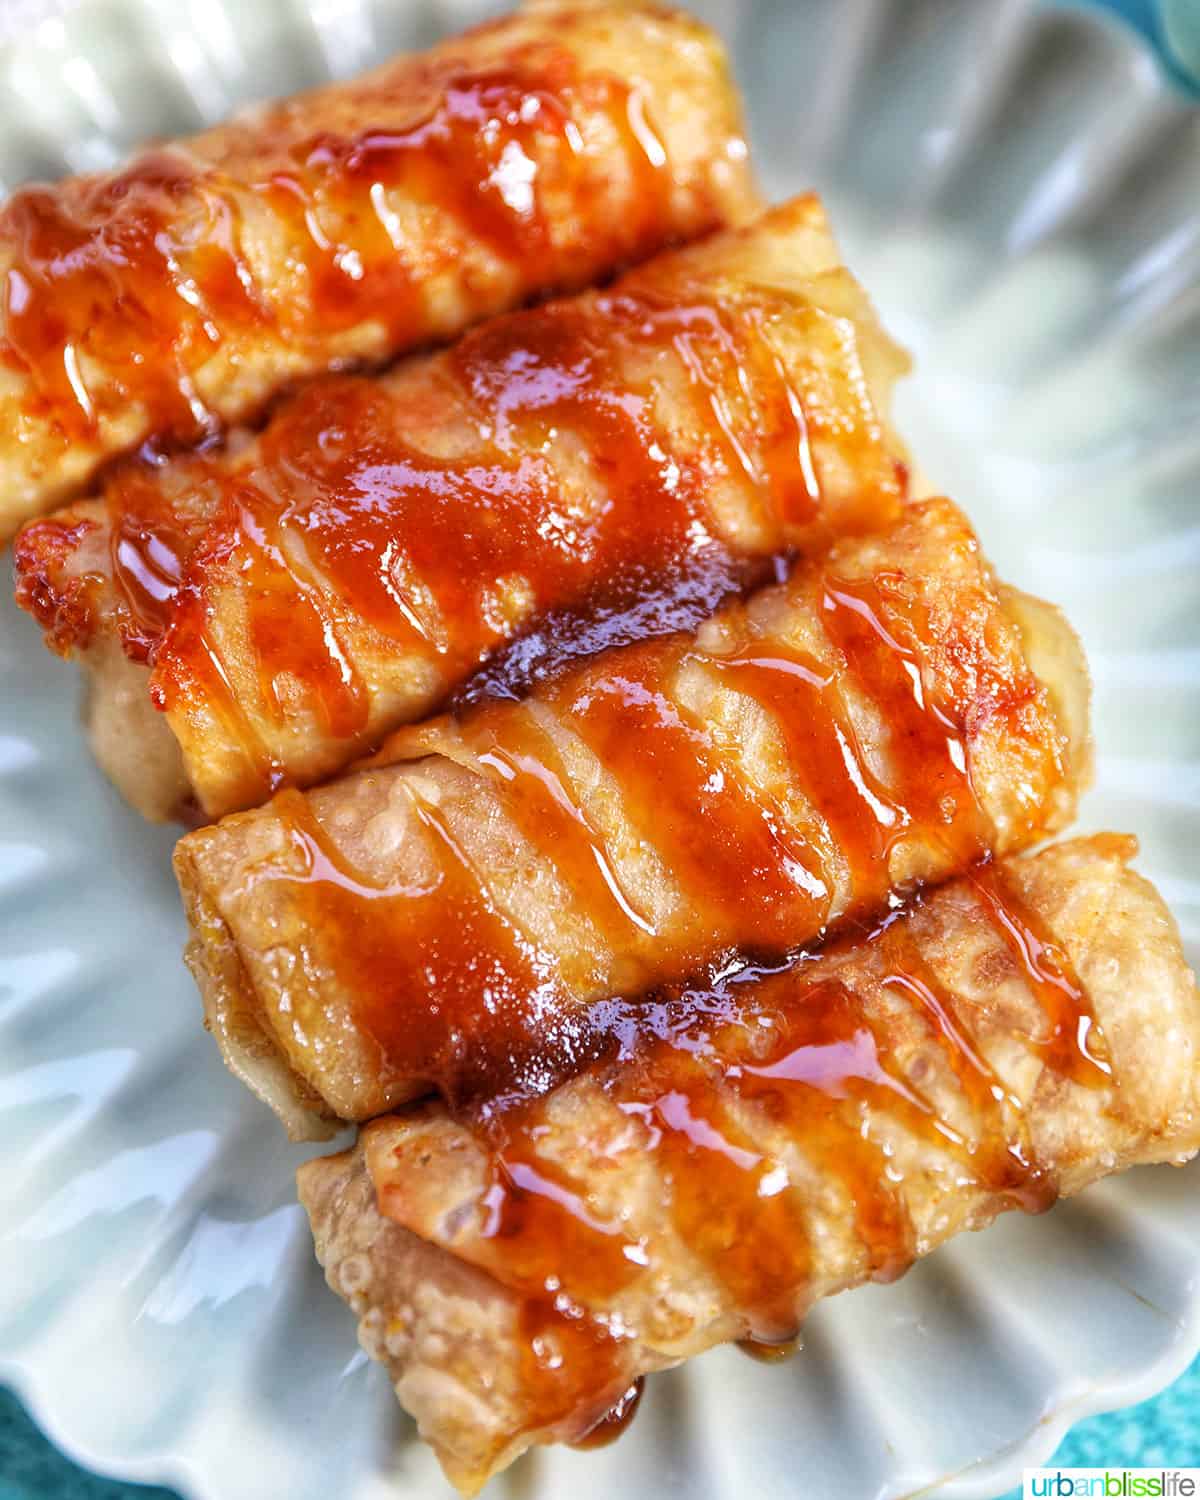 four turon (Filipino banana lumpia) on a scalloped plate drizzled with caramel sauce.